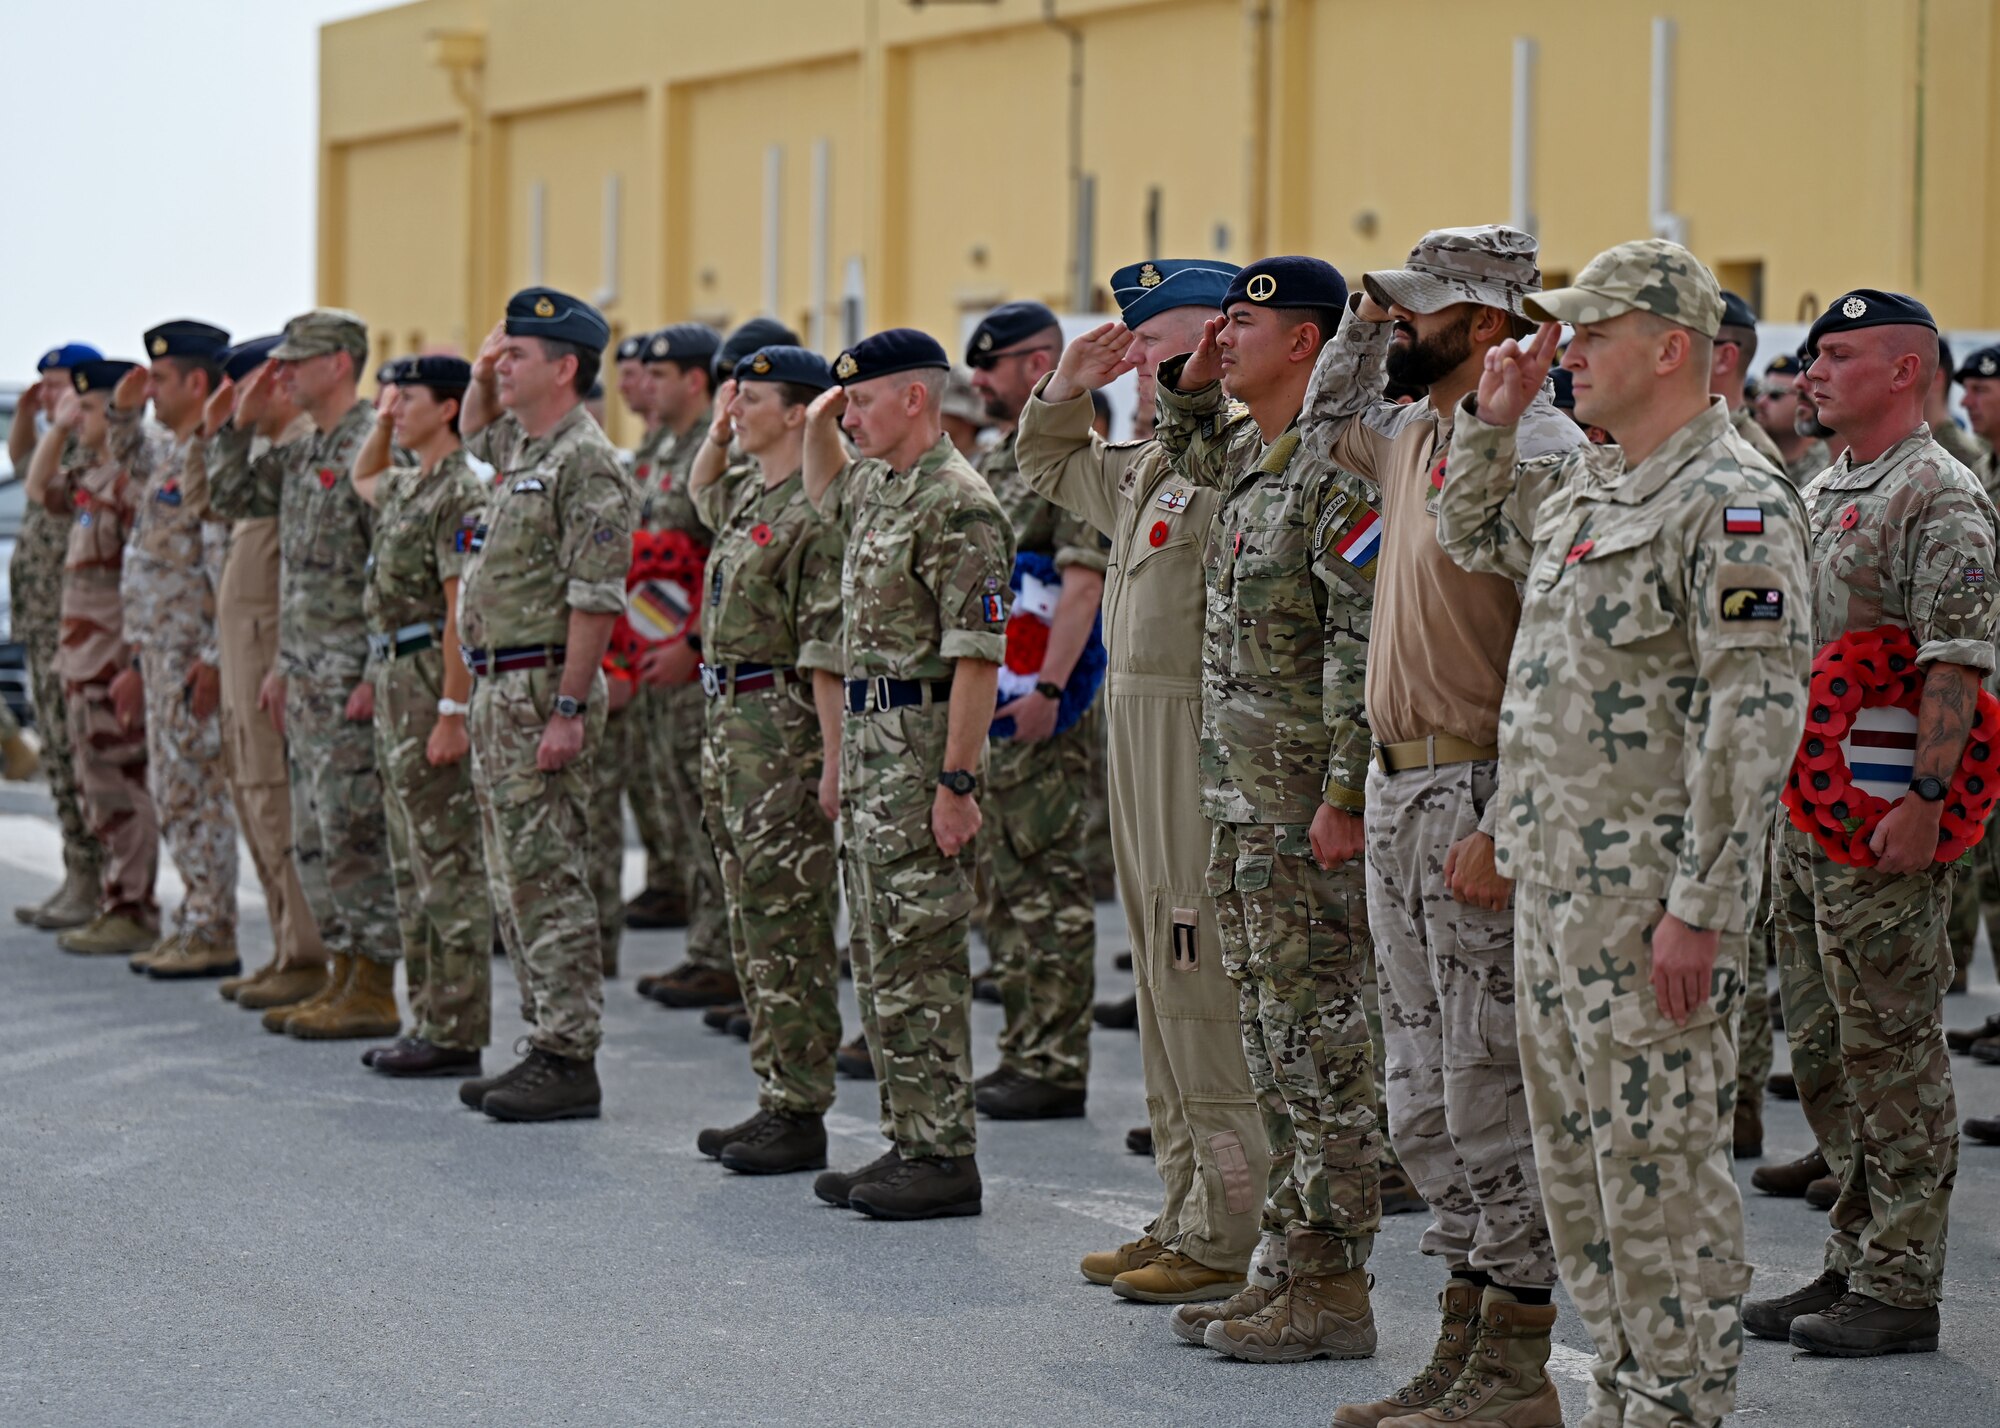 Senior Military officers from nine nations salute during Remembrance Day.